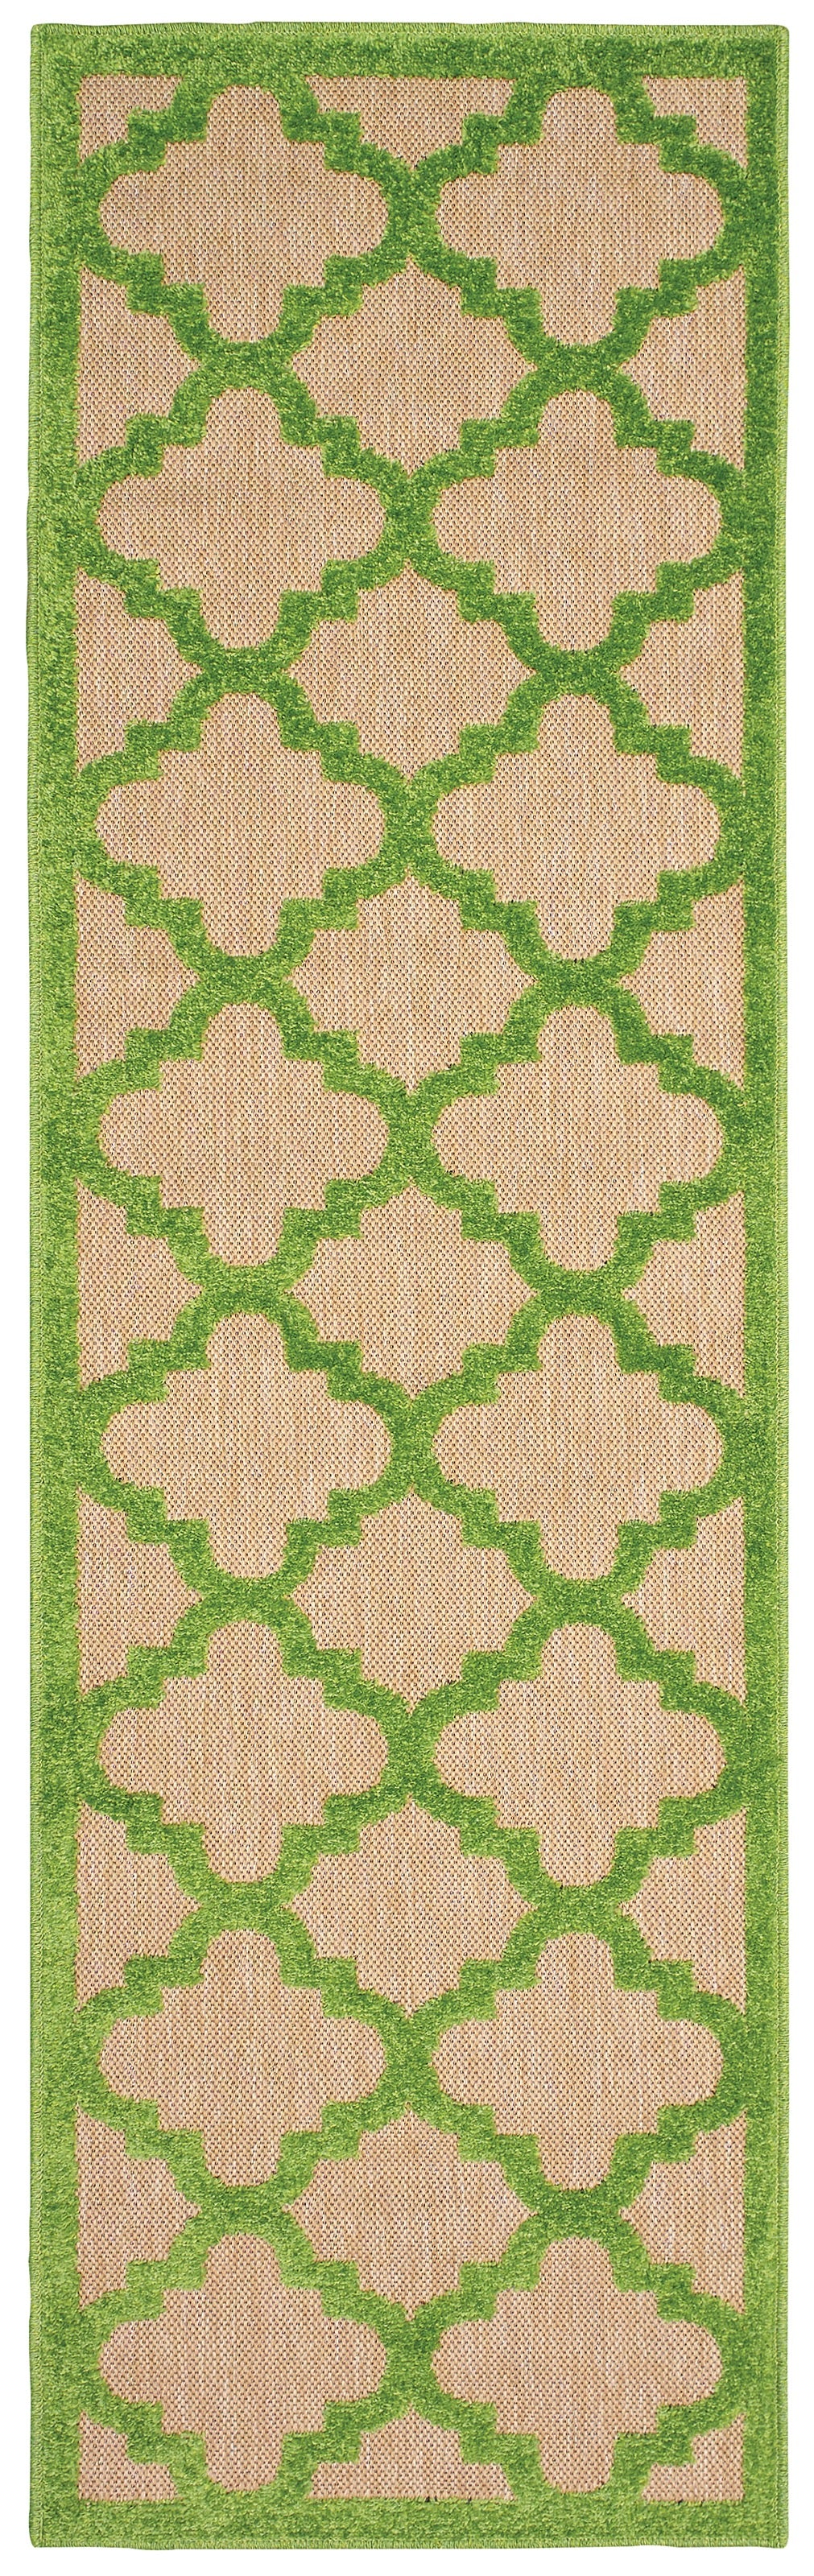 pet friendly area rugs cayman collection oriental weavers contemporary area rugs good for pets pee proof dog proof cat proof stain resistant area rugs high low pattern indoor outdoor area rugs